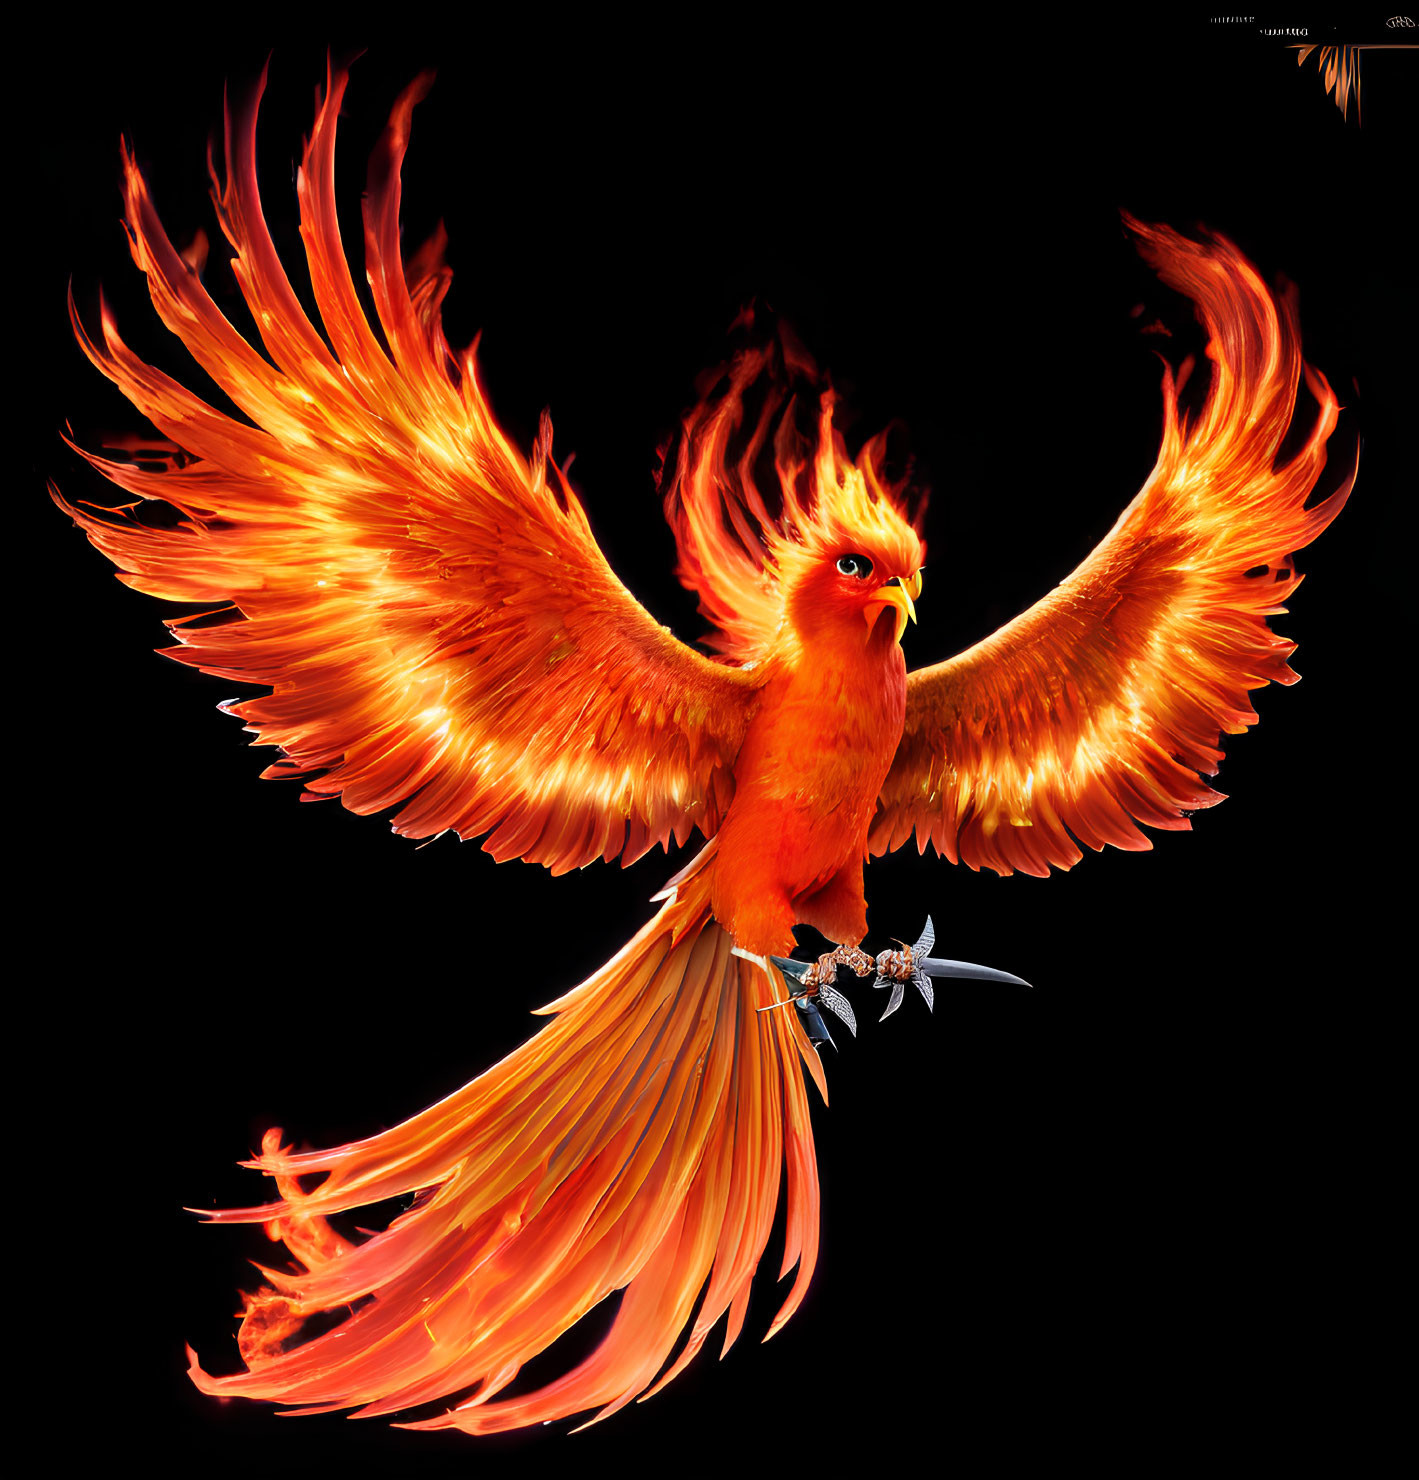 Colorful Phoenix with Fiery Wings: Digital Illustration in Orange and Red